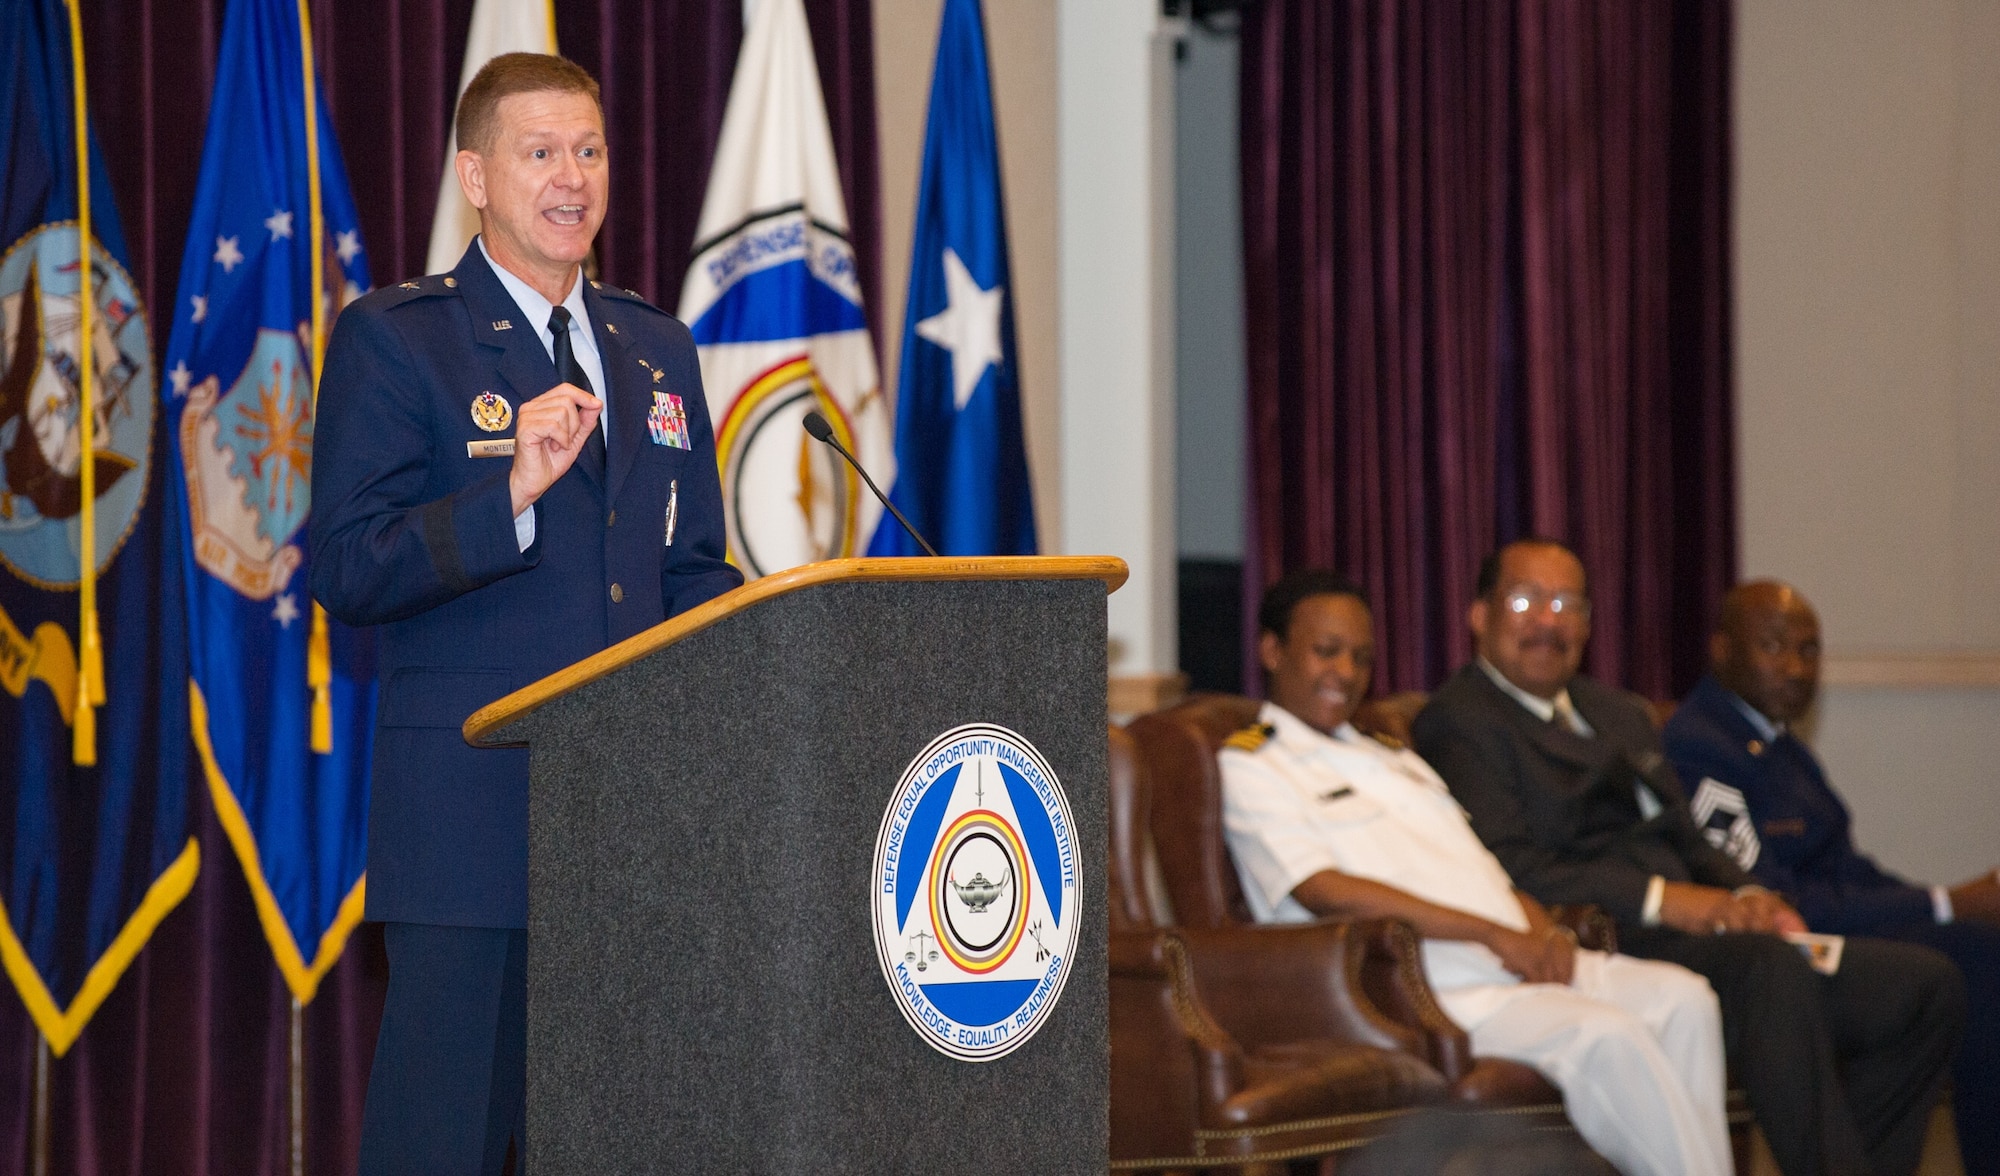 Brig. Gen. Wayne R. Monteith, 45th Space Wing commander, speaks to members of Class 15-3 while giving the graduation speech for the final Equal Opportunity Advisors Course of 2015 at the Defense Equal Opportunity Management Institute  at Patrick Air Force Base, Fla. Joining Monteith in the official party on stage for the Class 15-3 ceremony from DEOMI were (left to right) Commander Yolanda K. Mason, Acting Commandant, Dr. Jose Bolton, Dean of Equal Opportunity and Equal Employment Opportunity and Chief Master Sgt. Boston Alexander, Senior Enlisted Advisor. (U.S. Air Force photo/Benjamin Thacker/Released) 